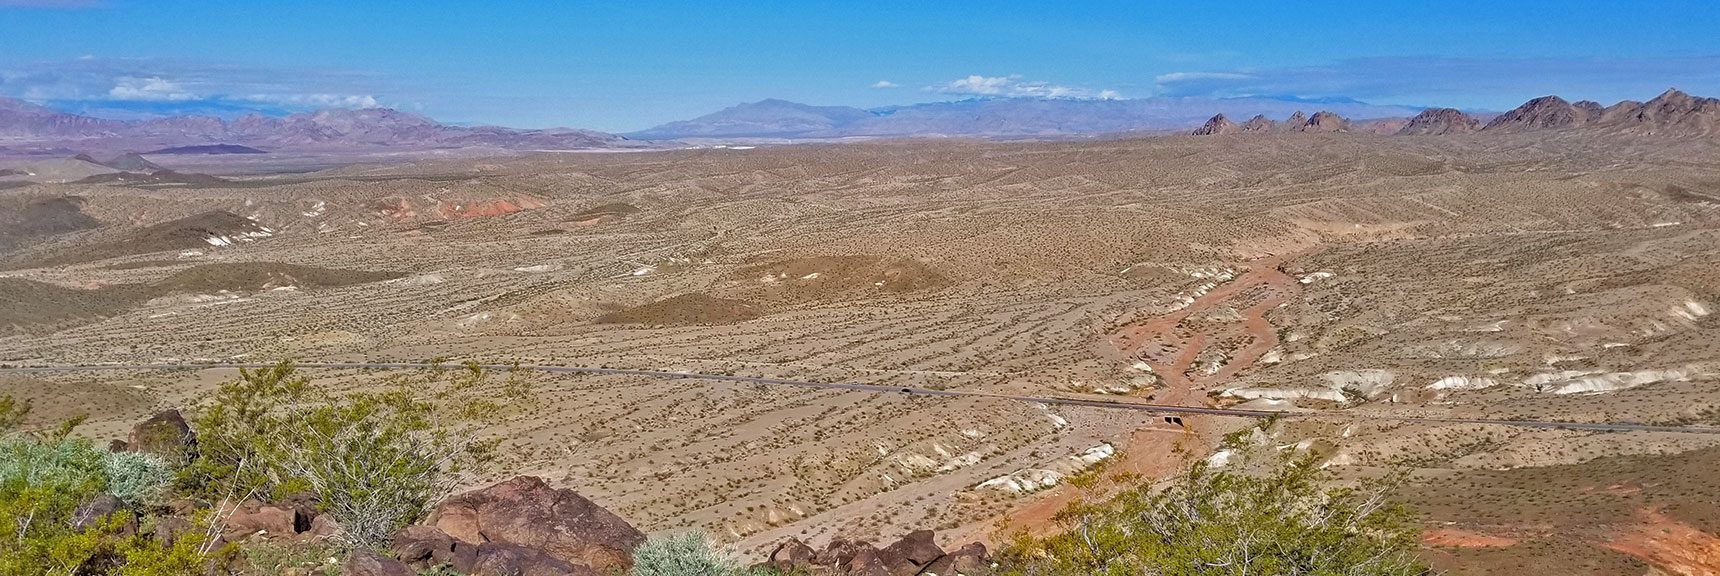 View Northwest Toward Gass Peak from Black Mesa in Lake Mead National Recreation Area, Nevada